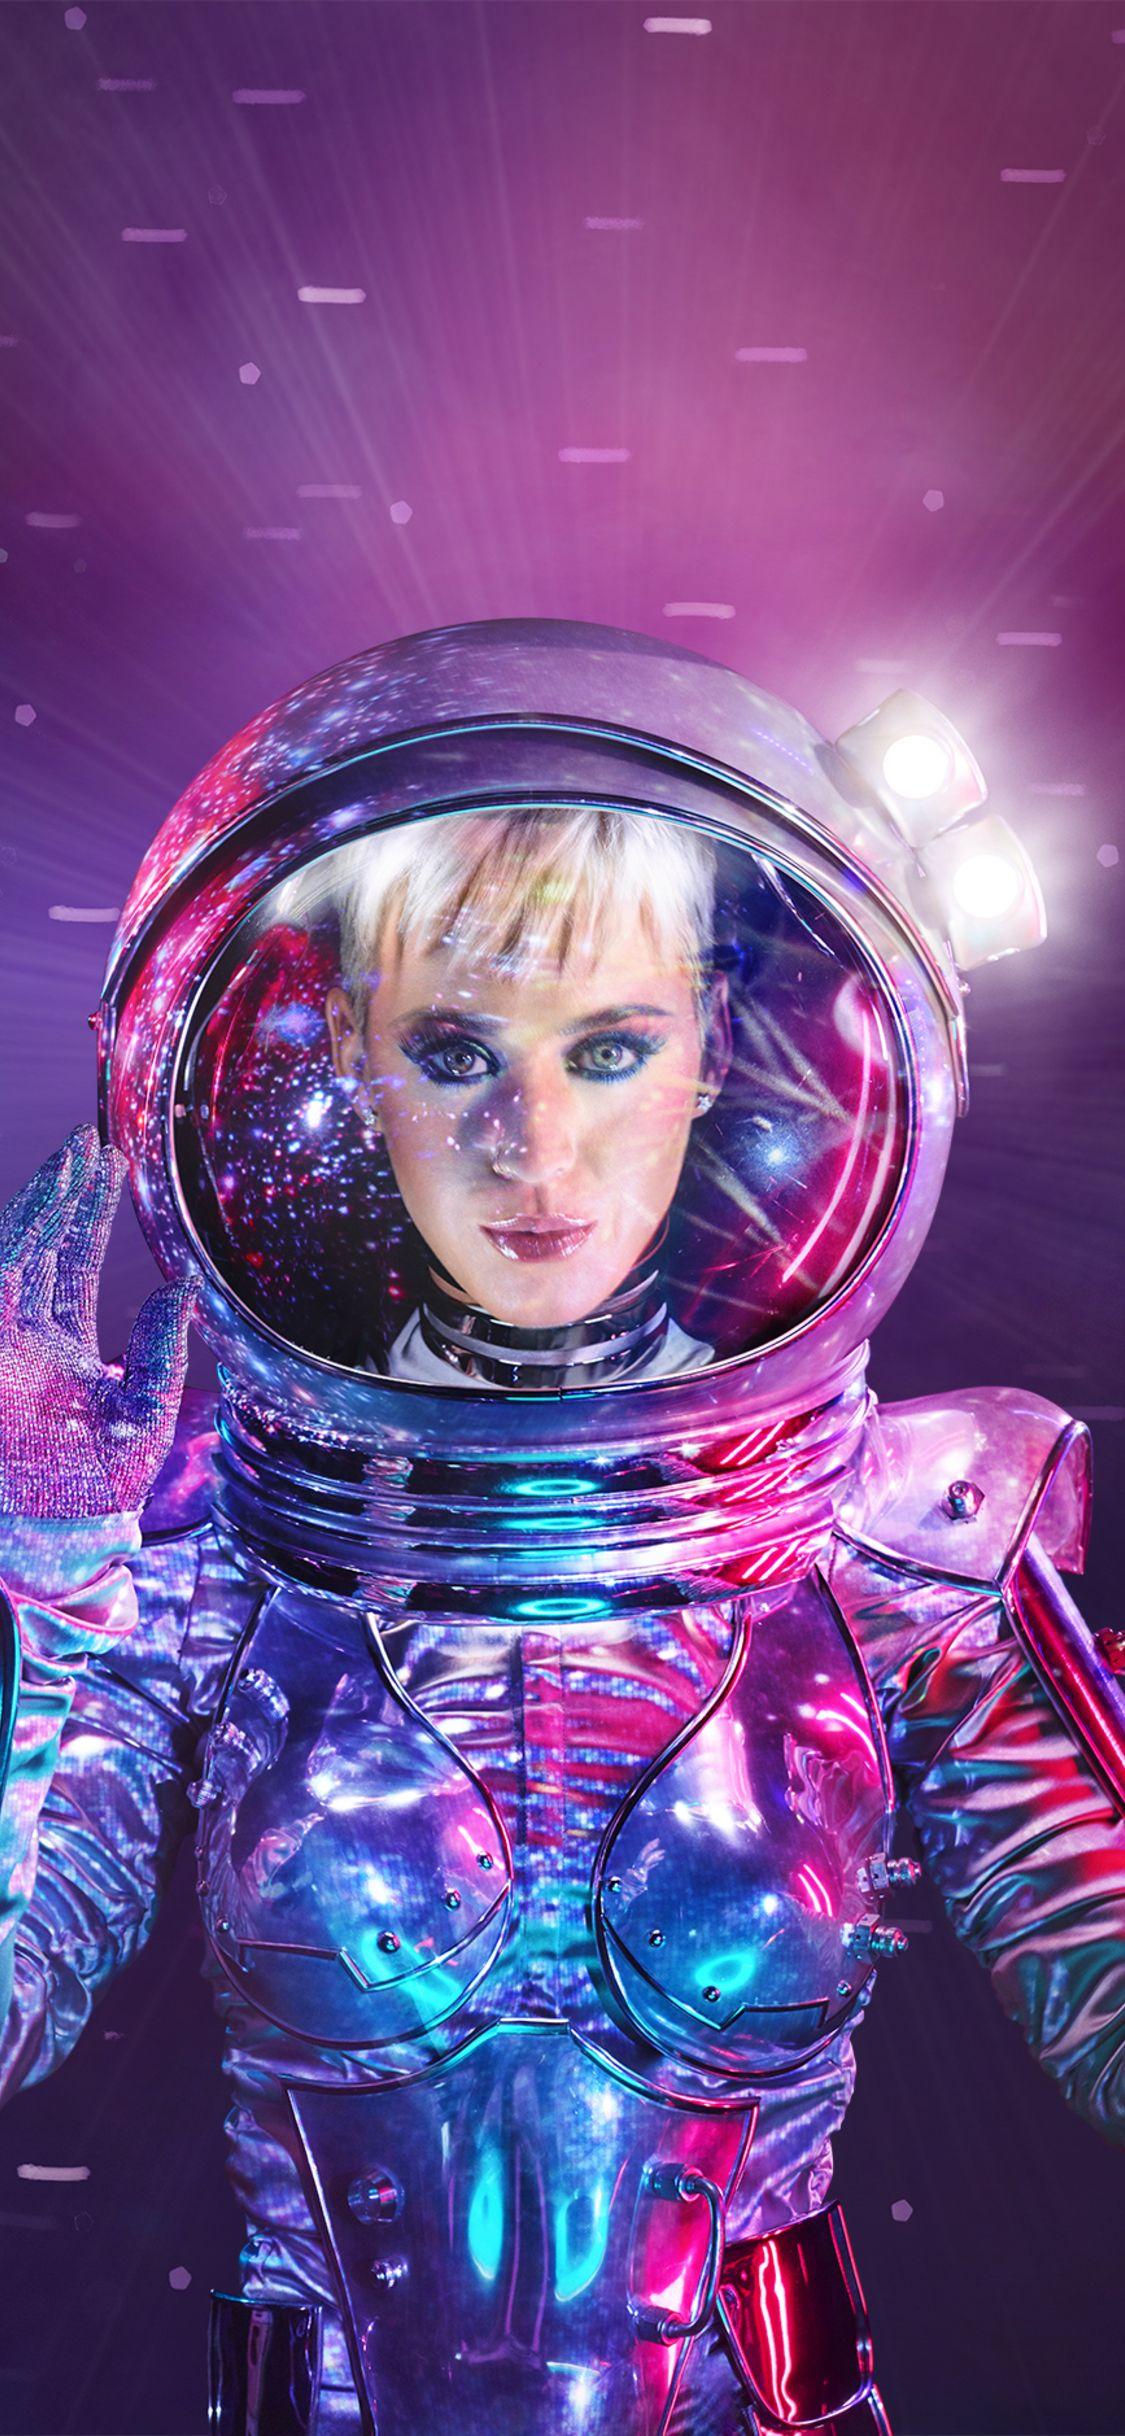 Featured image of post Katy Perry Wallpaper Iphone We hope you enjoy our growing collection of hd images to use as a background or home screen for your smartphone or computer